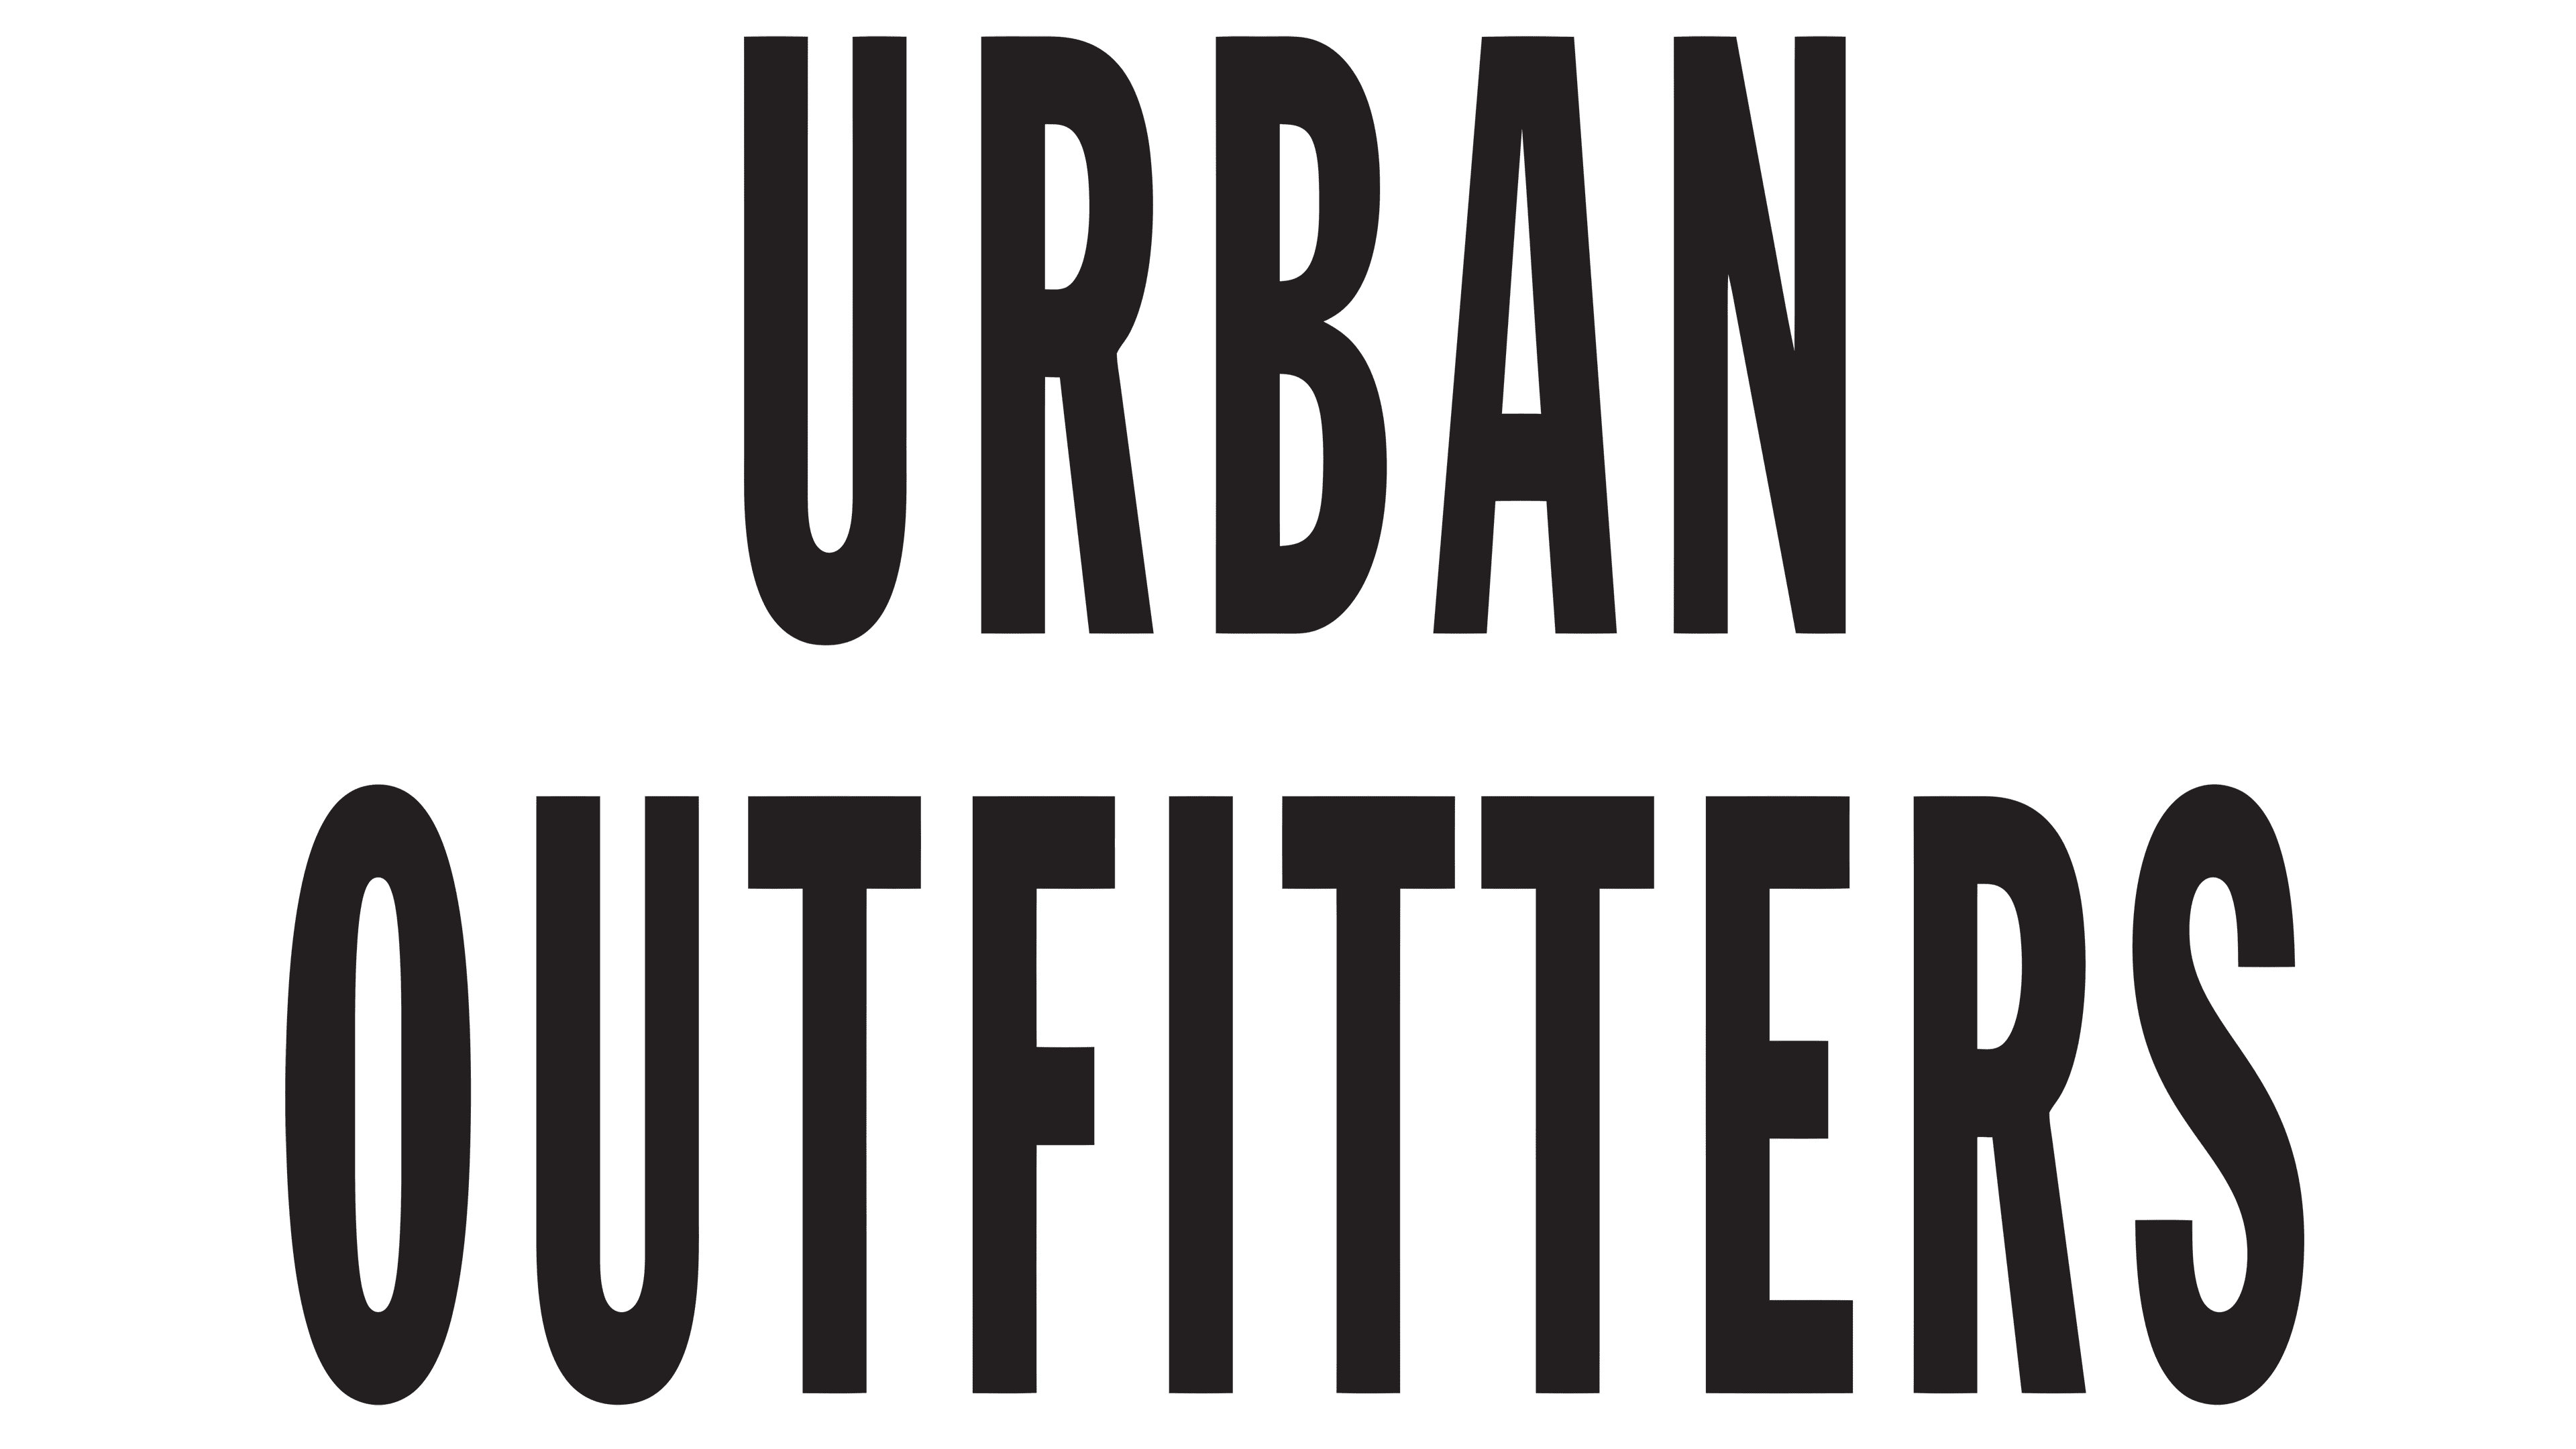 Urban Outfitters: Latest News, Analysis and Commentary